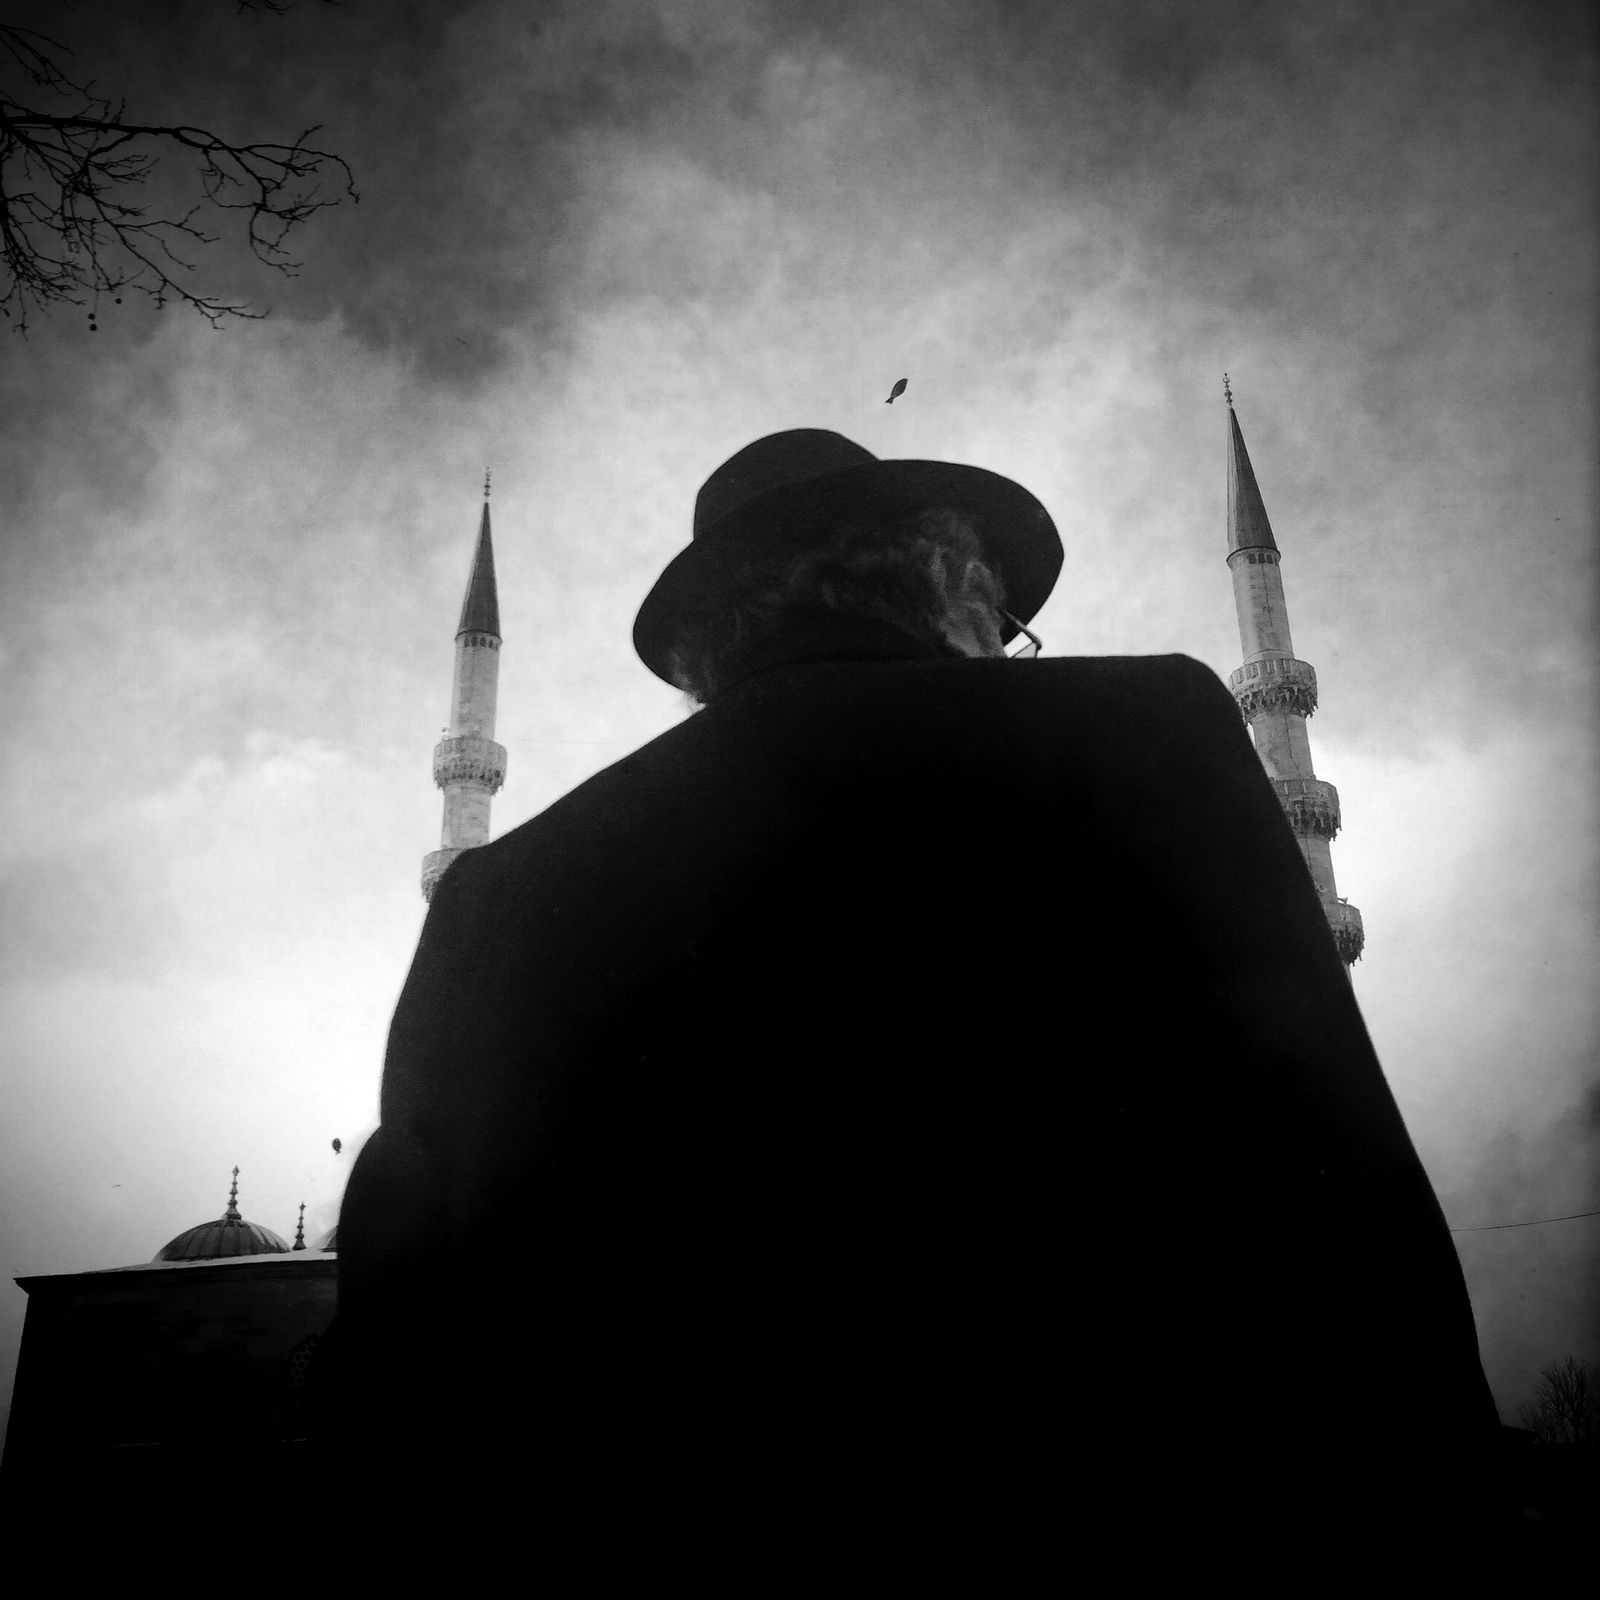 © sevil alkan - Image from the urban anımal photography project